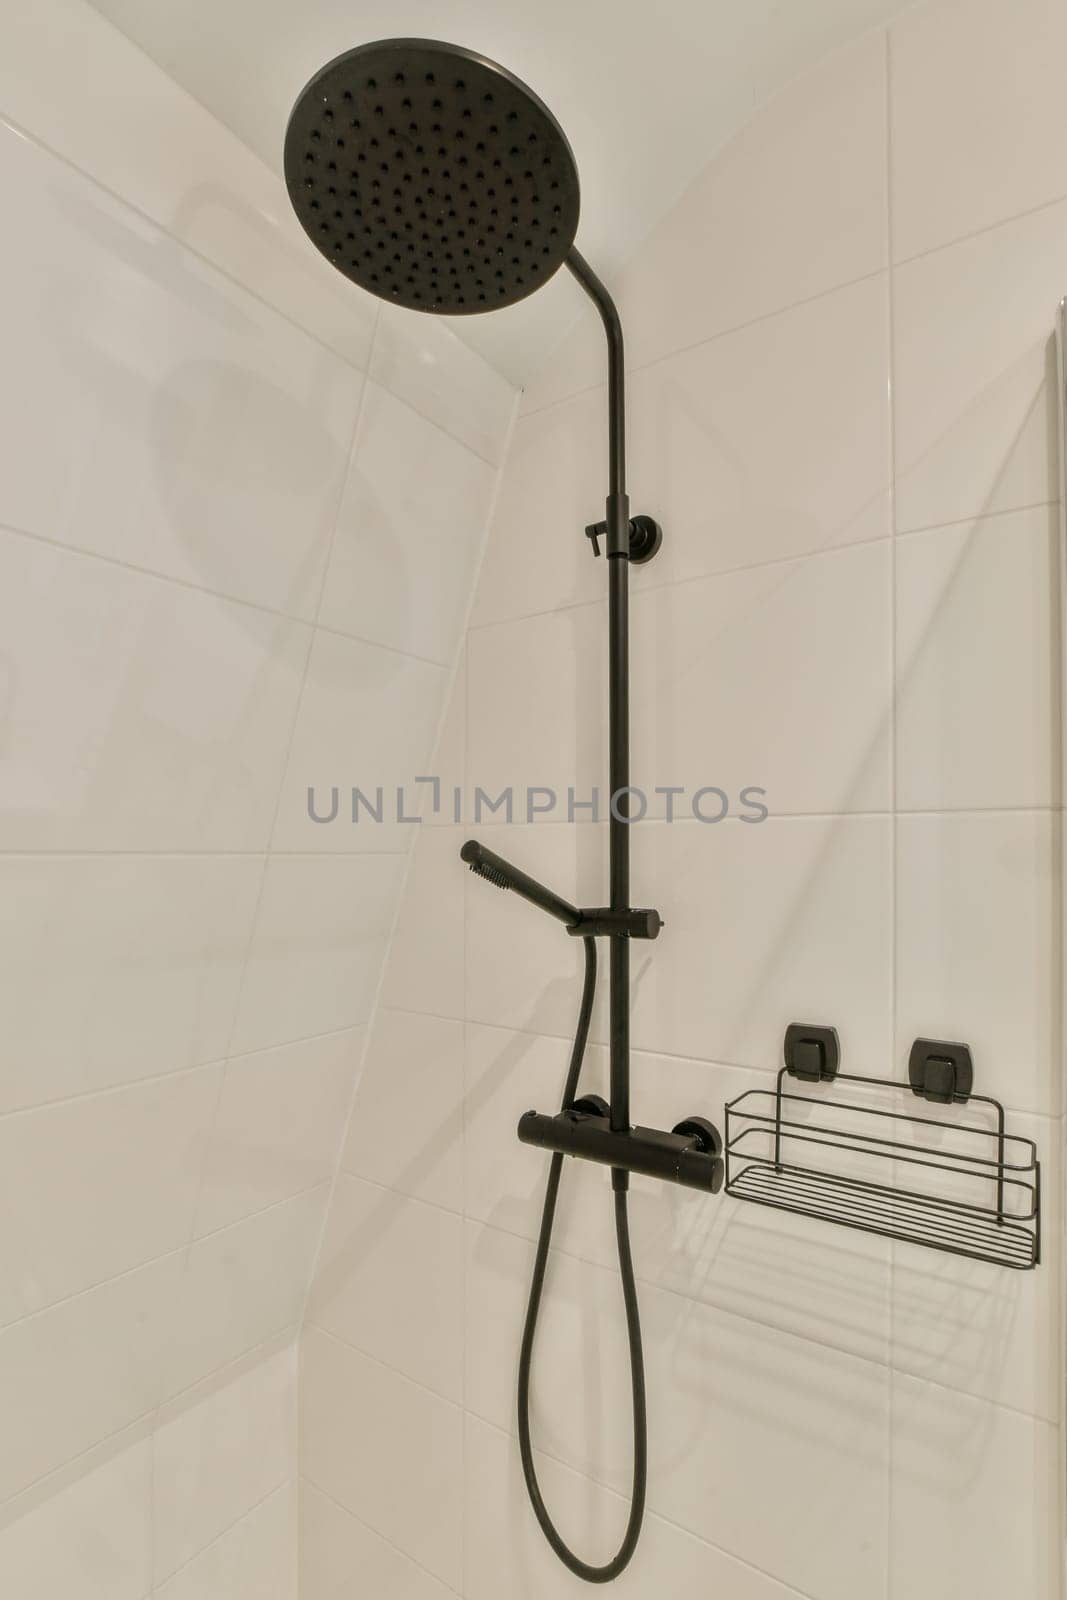 a black shower head in a white tiled bathroom with an overhead hand rail and wall mounted shower faucet